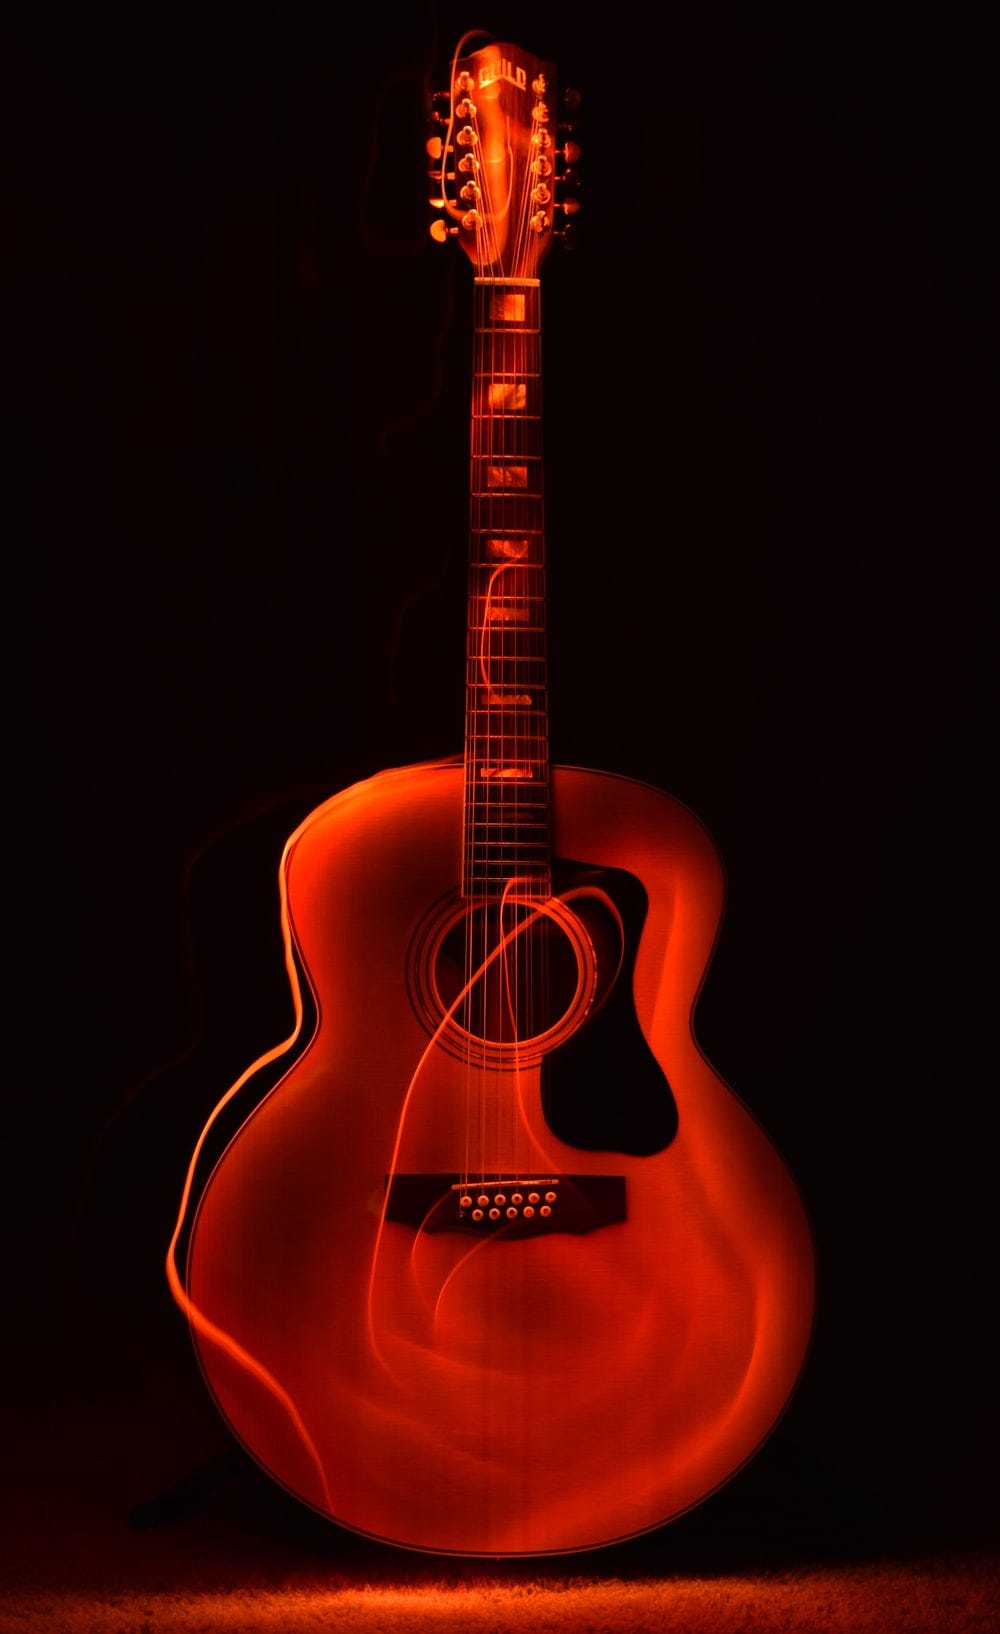 The Guitar and the Ego: Valuing the Wrong Things - Andrew - Medium